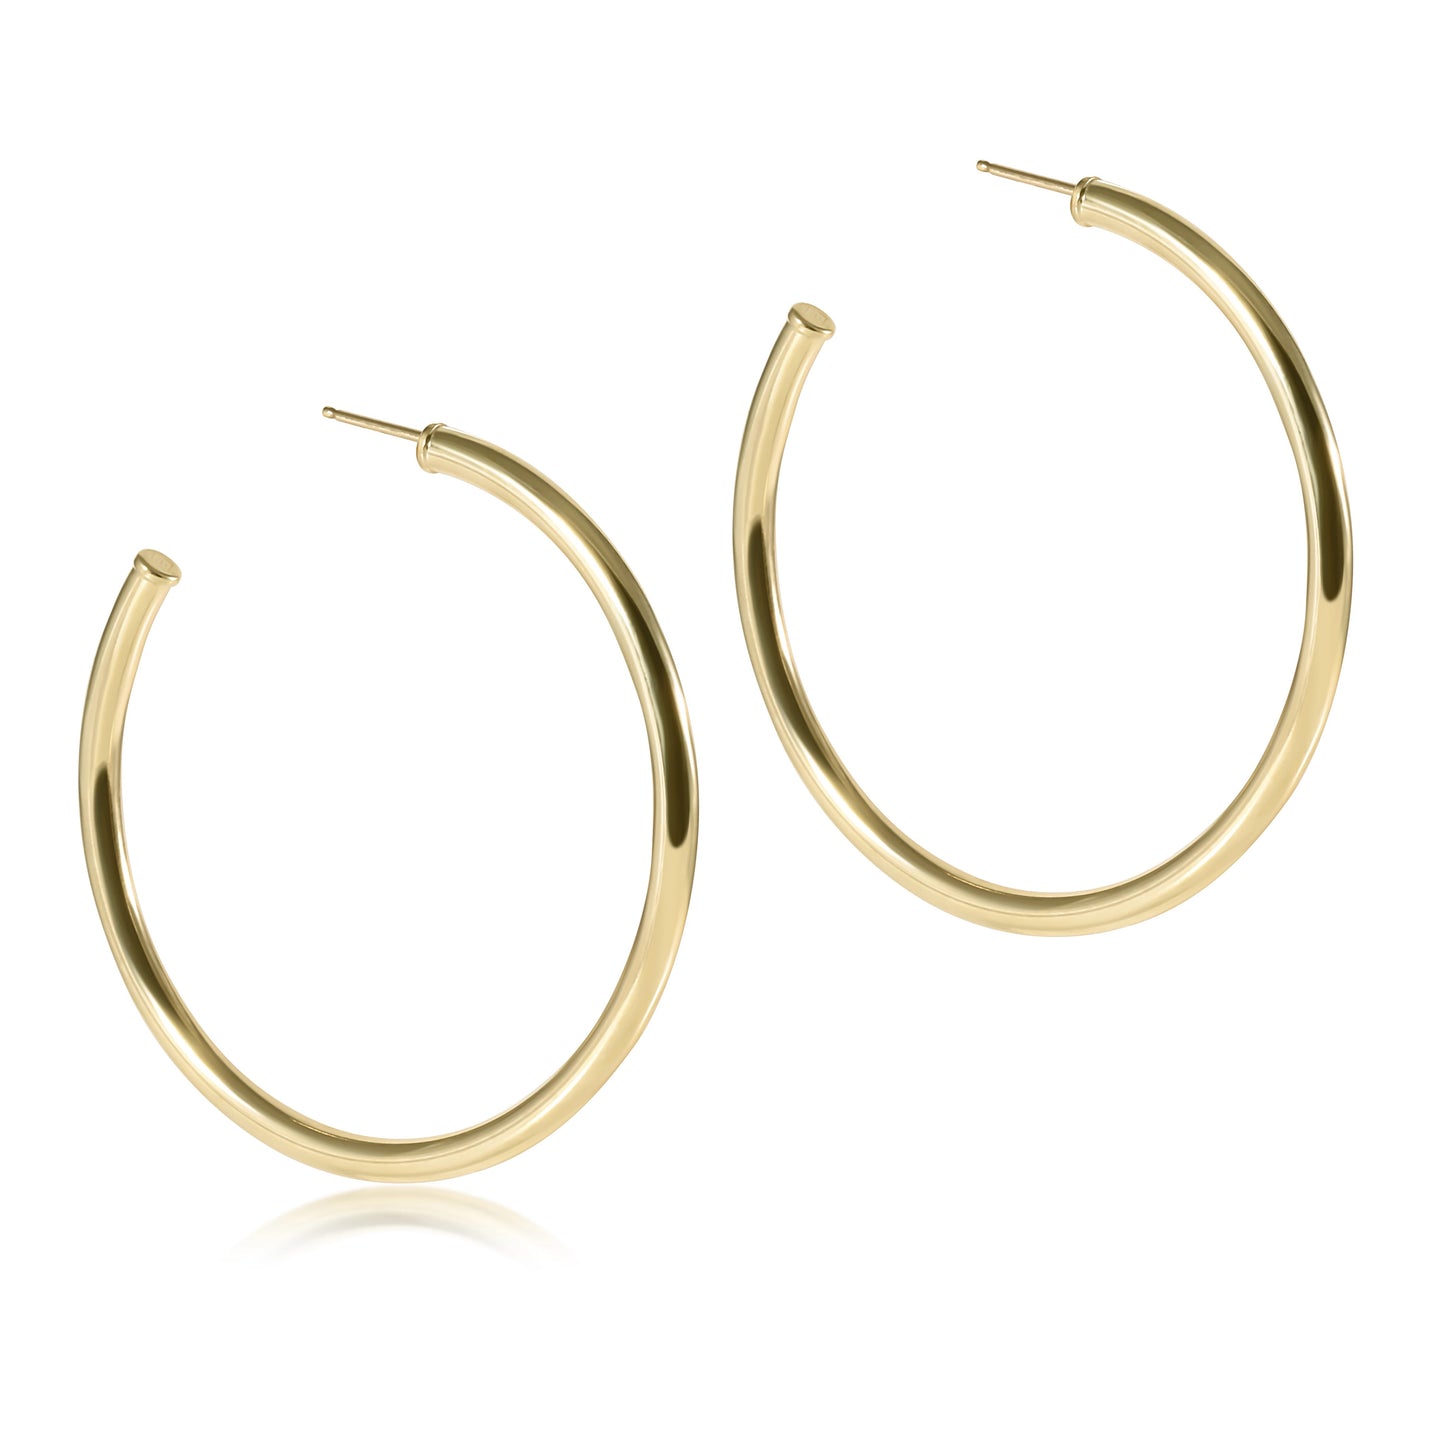 ROUND GOLD POST HOOP-3MM SMOOTH